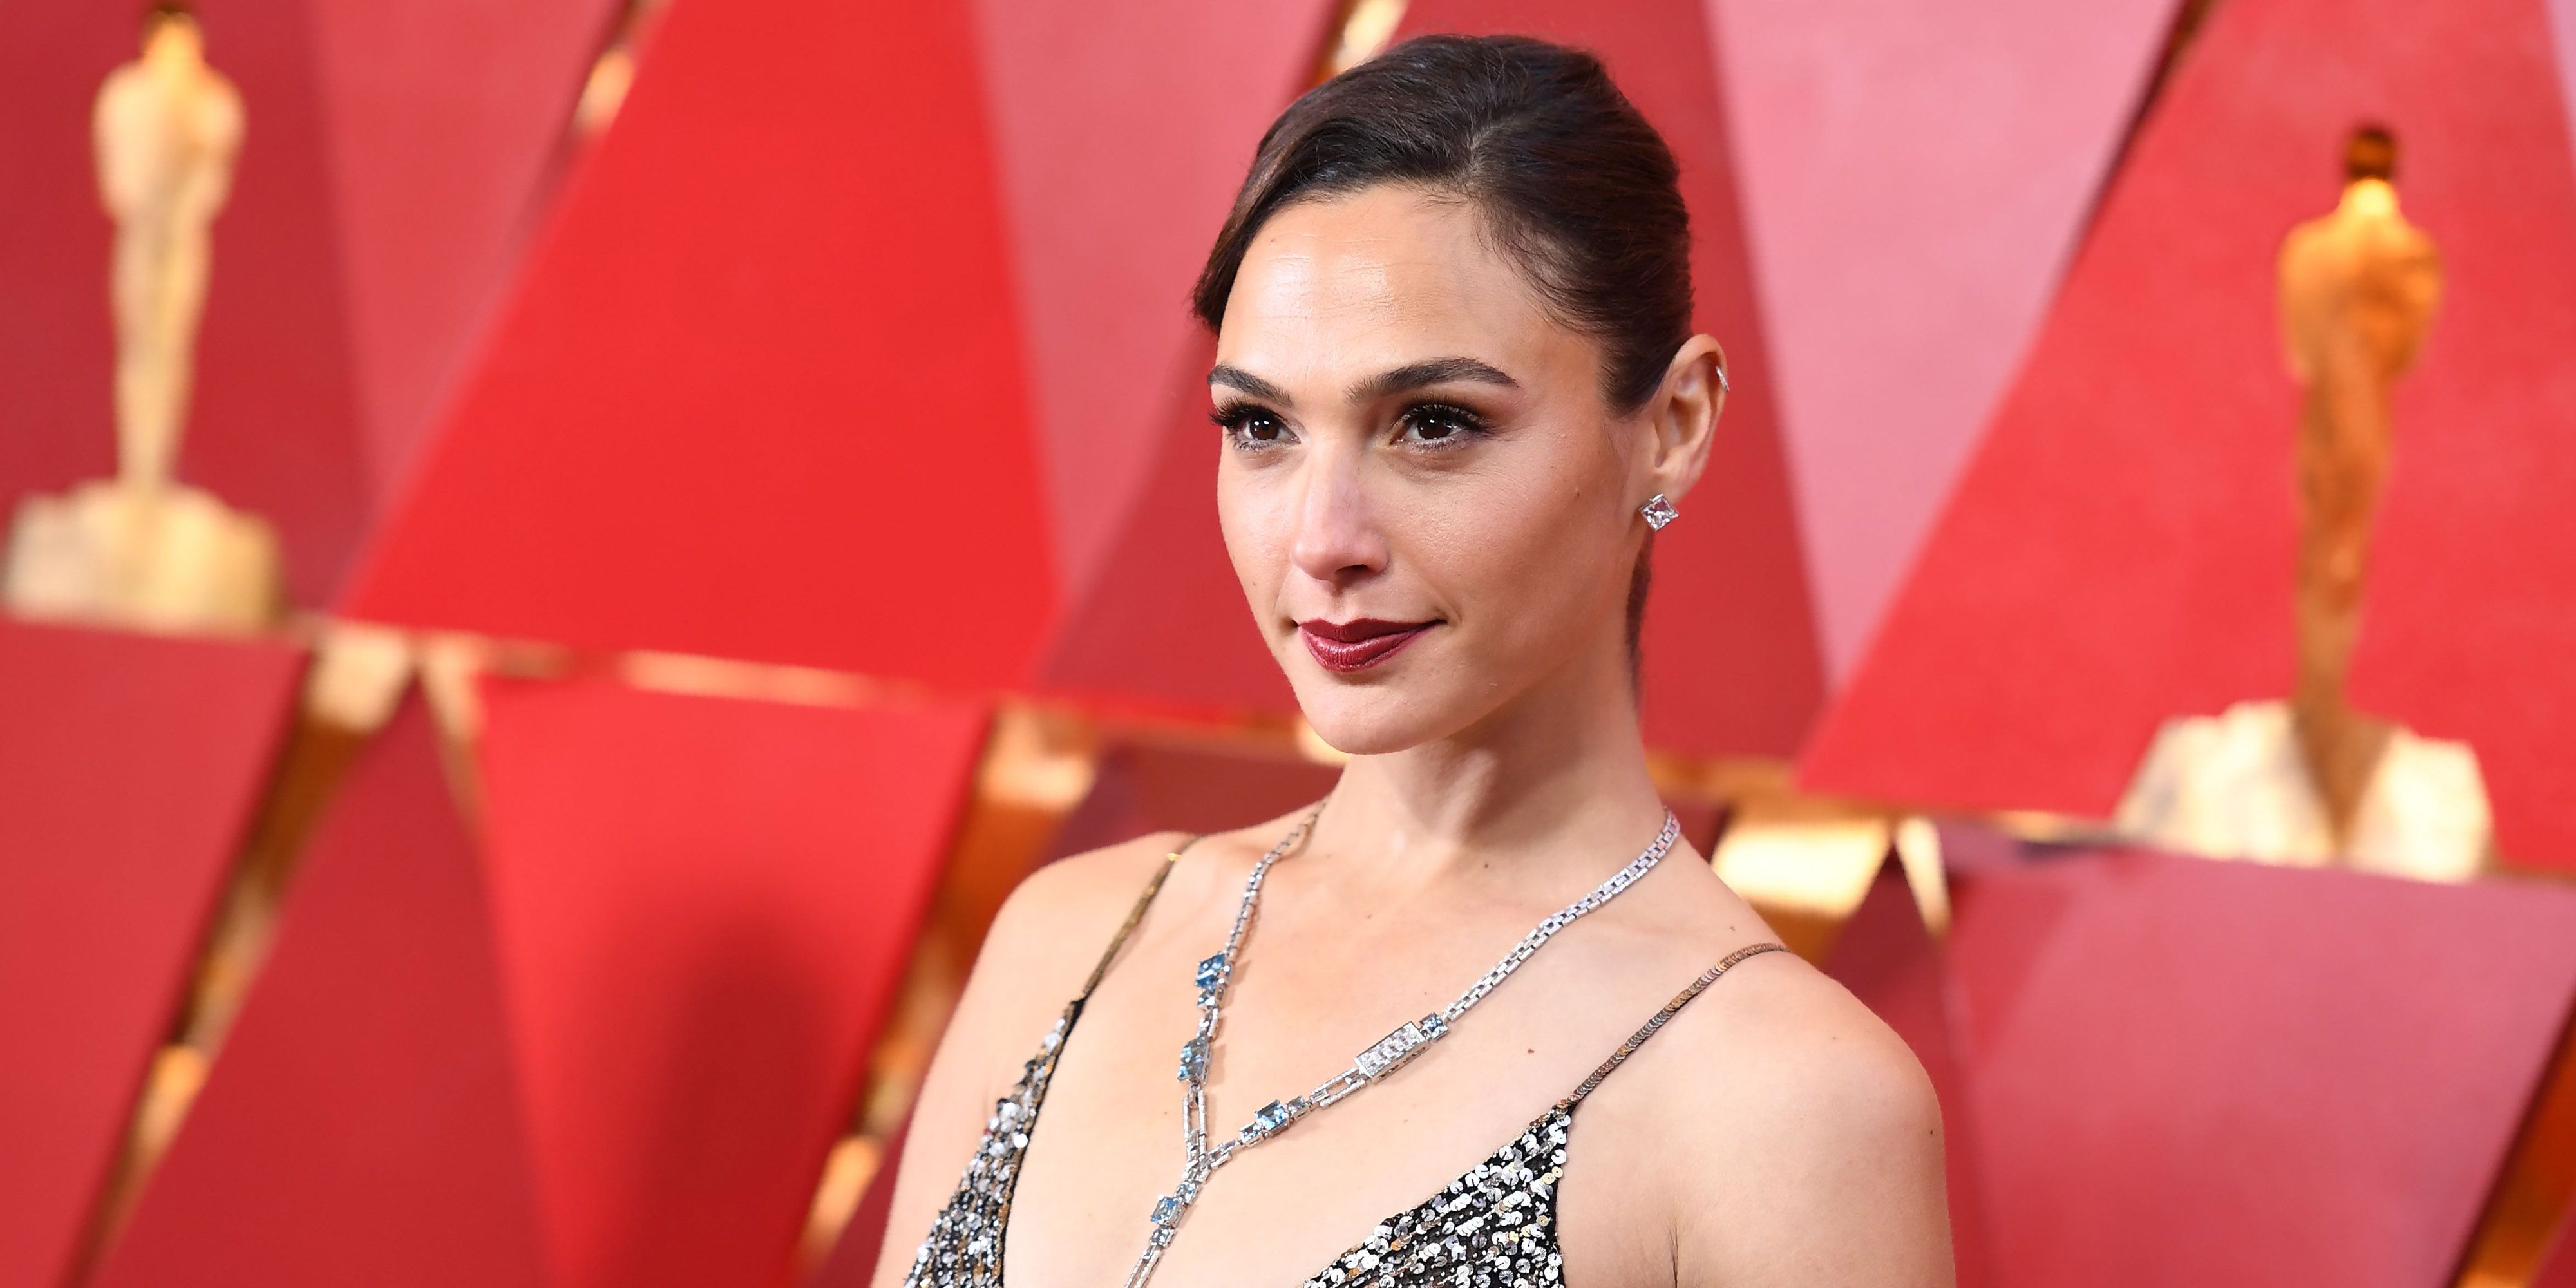 Justice League' Star Gal Gadot's Super-Glam Red-Carpet Style